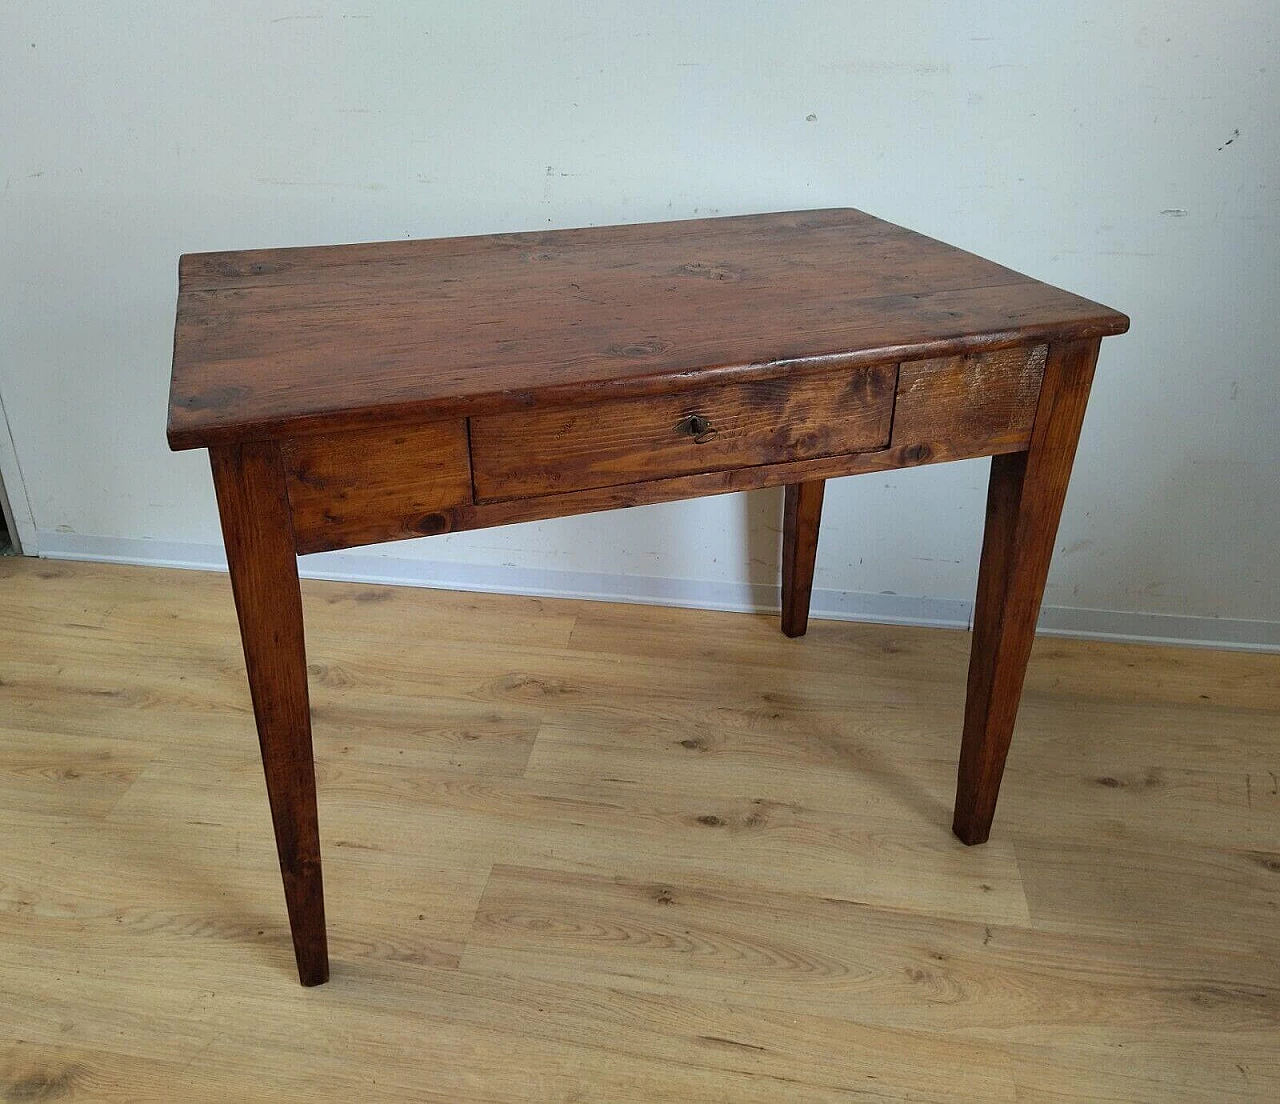 Walnut-stained solid spruce desk, late 19th century 15